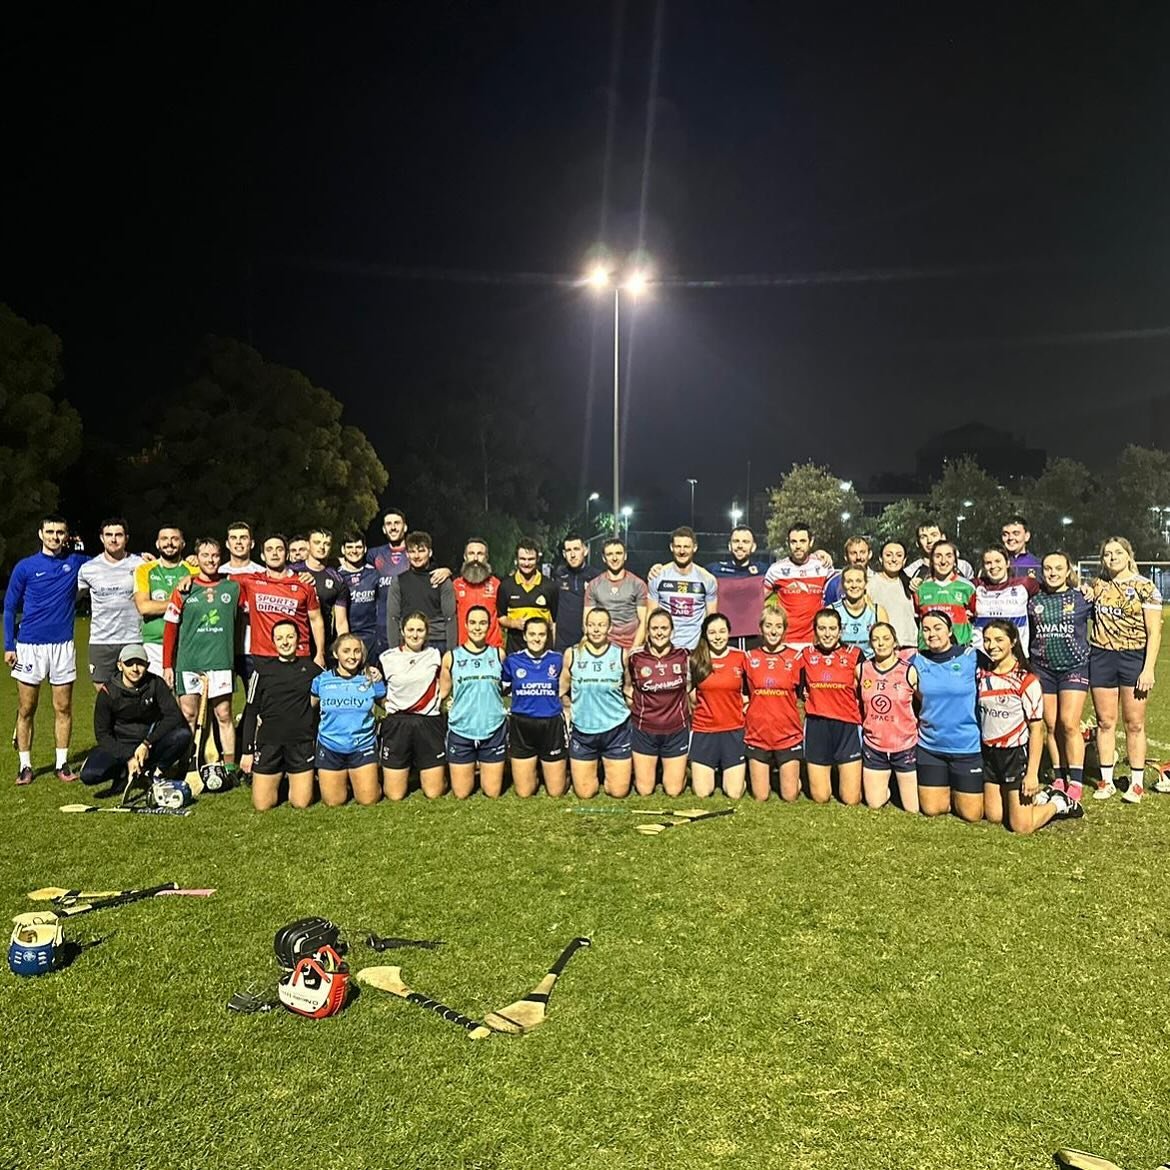 ✨🥎 Hurling and Camogie Joint Session 🥎✨

Hard work does not stop for the lads and ladies of Garryowen after a successful weekend! 

🏐 ☘️ Koroit Irish Festival ☘️🏐

Garryowen ladies footballers and Camogie head off on their annual weekend away to 